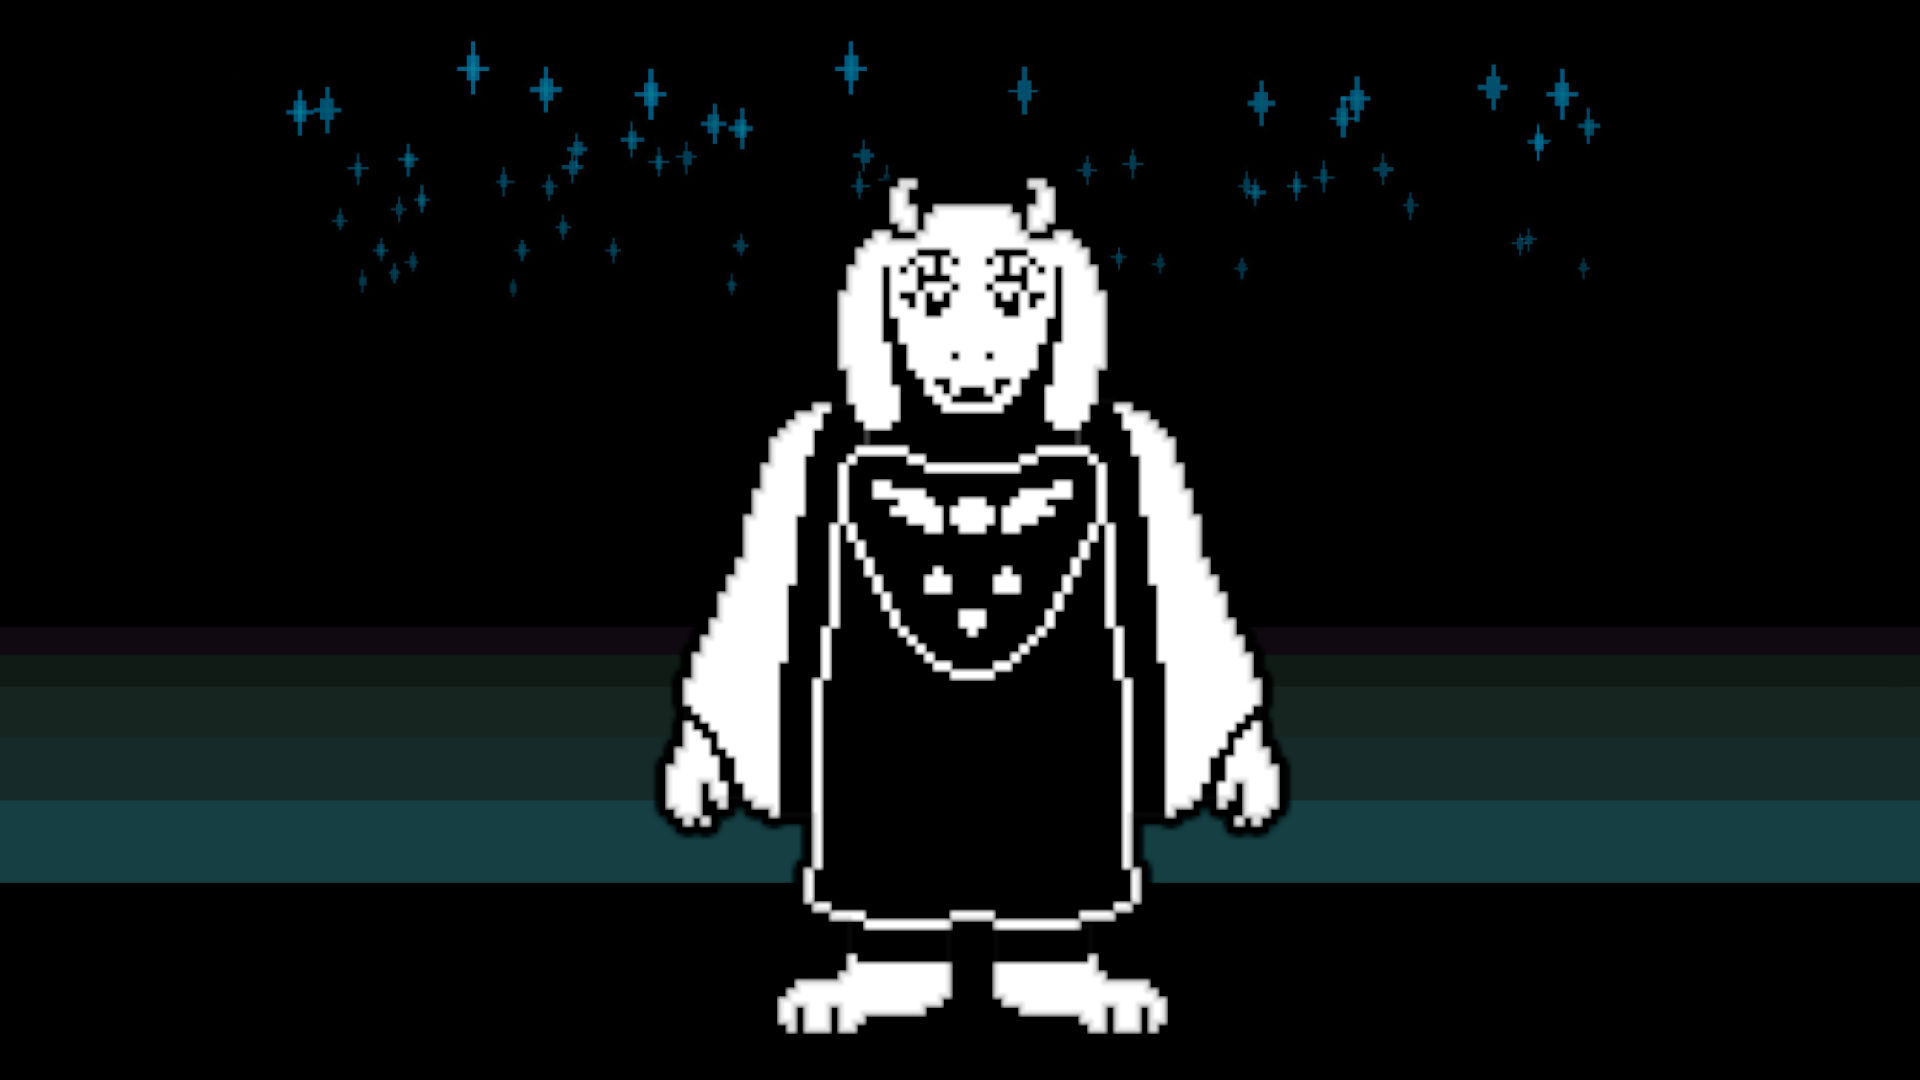 Undertale Frisk lore, gender, age, and real name